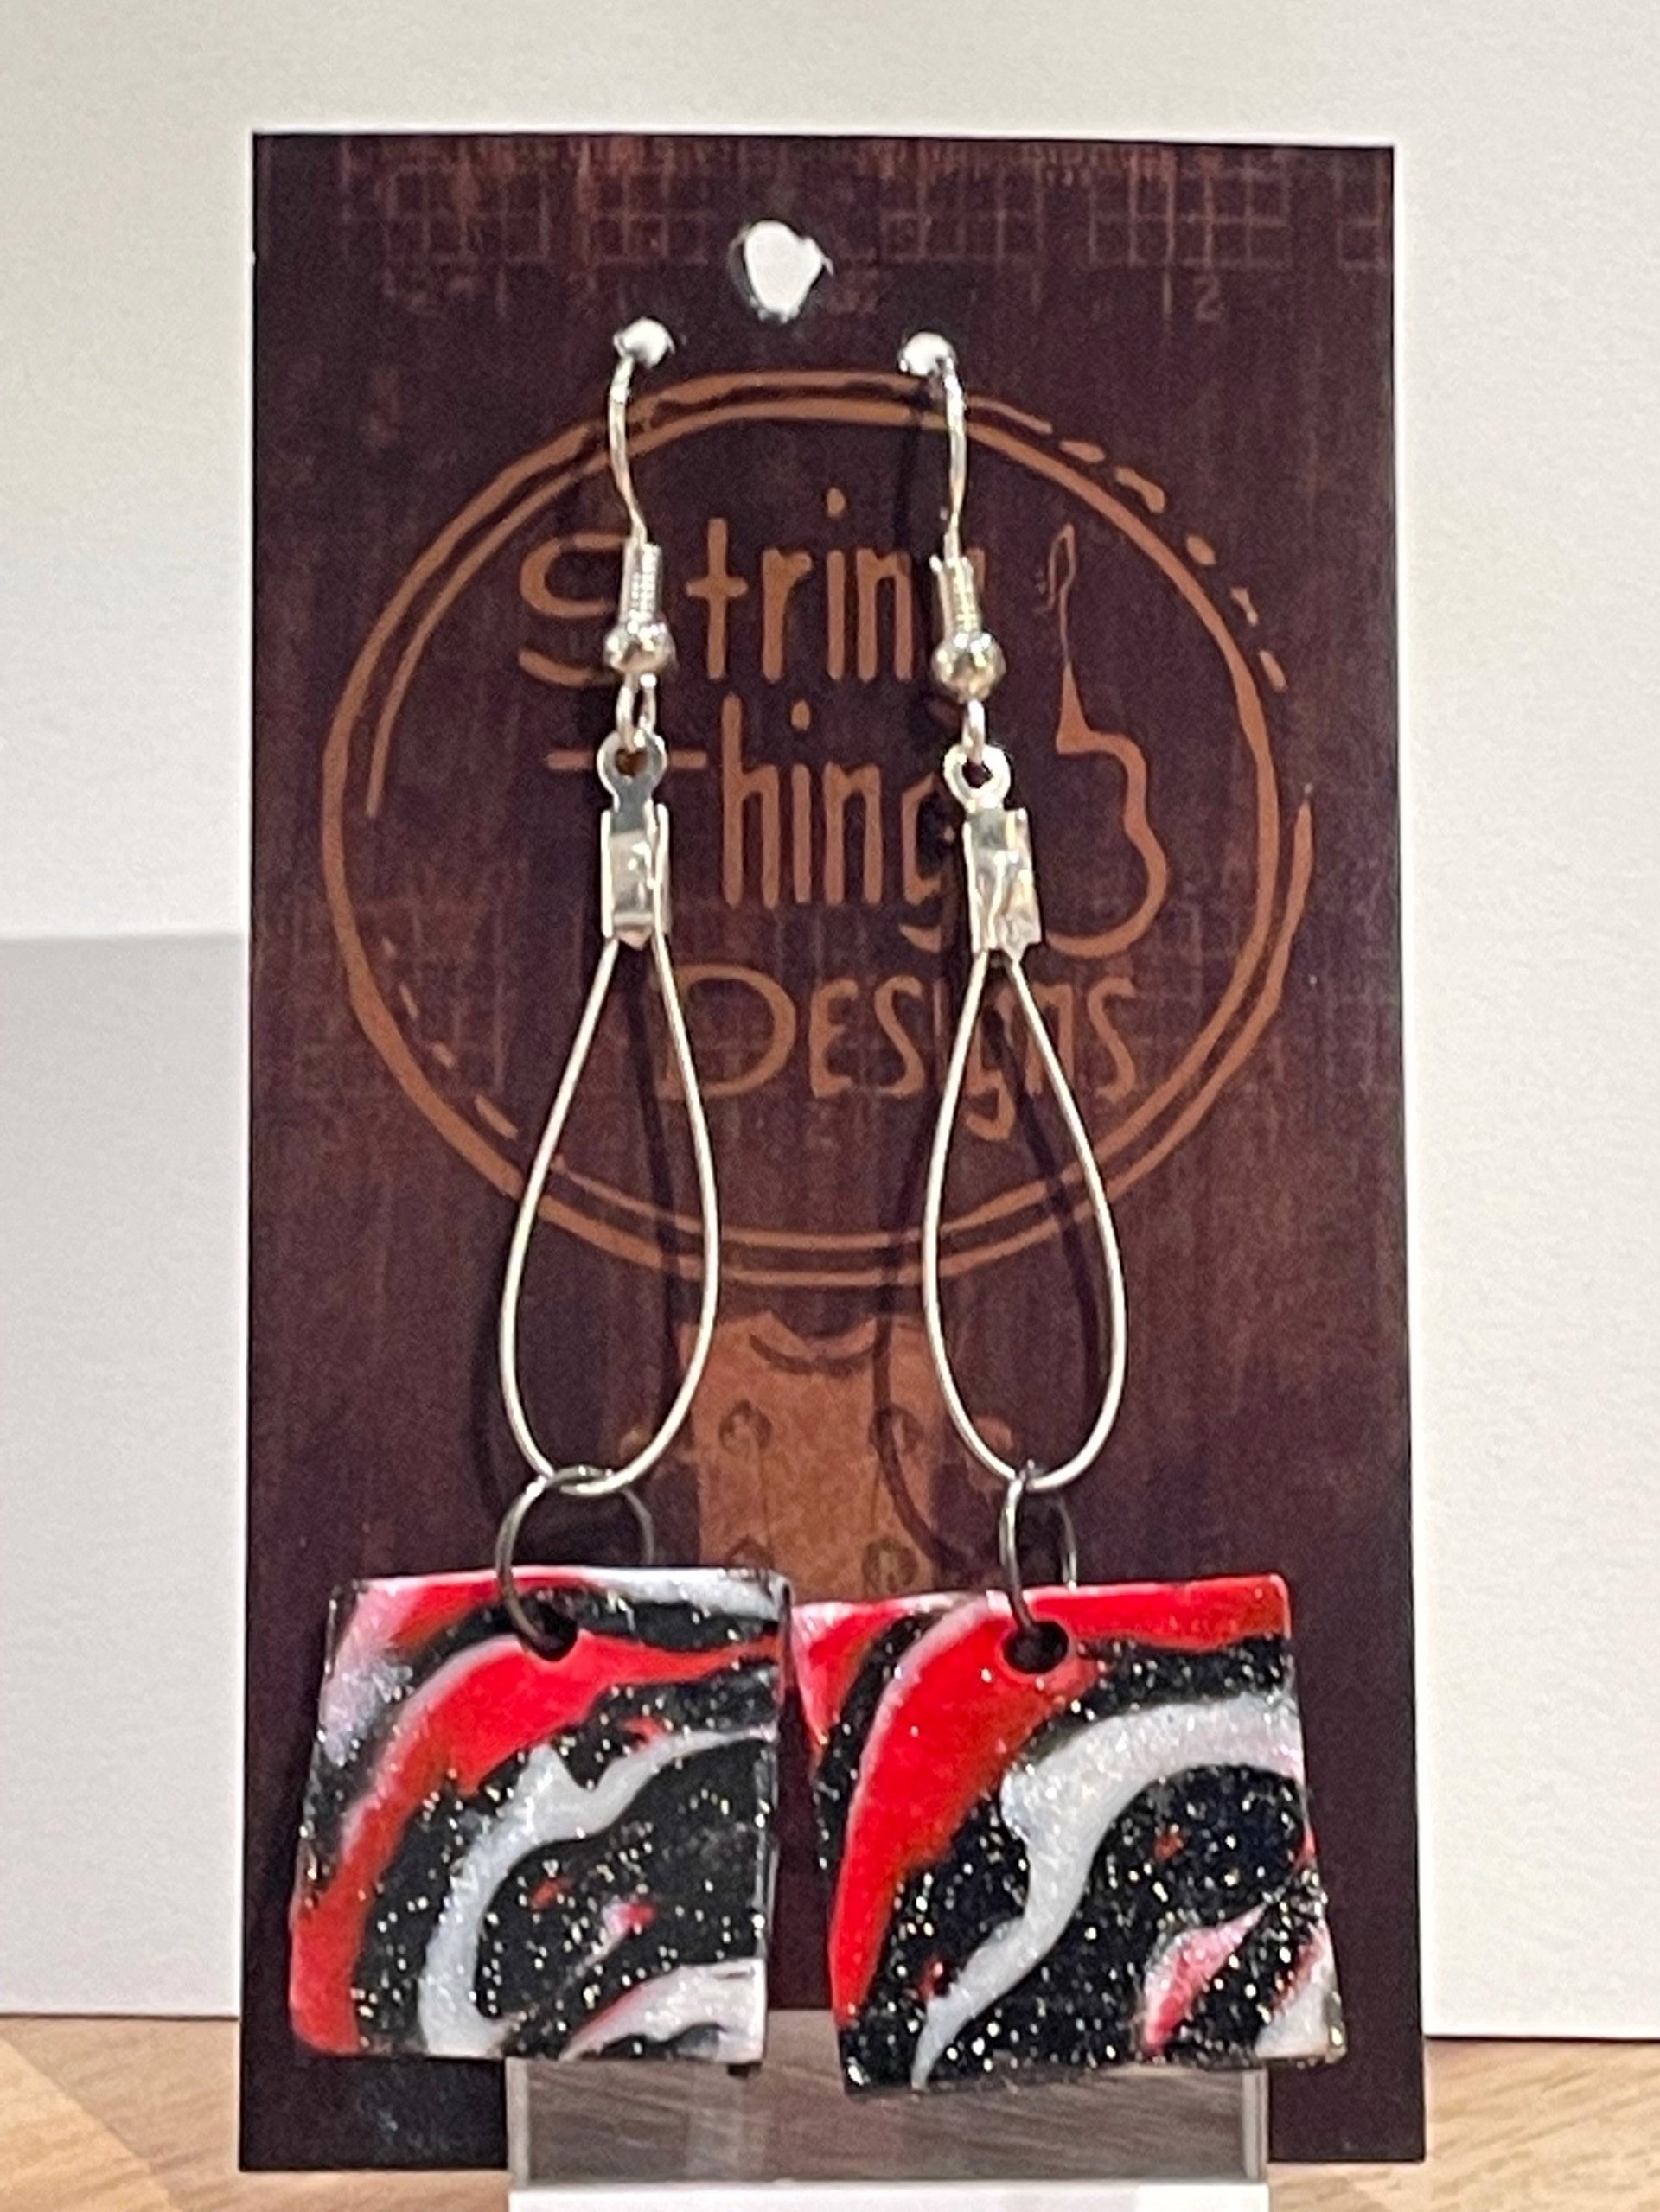 Pink/Red/Black Square Guitar String Earrings by String Thing Designs